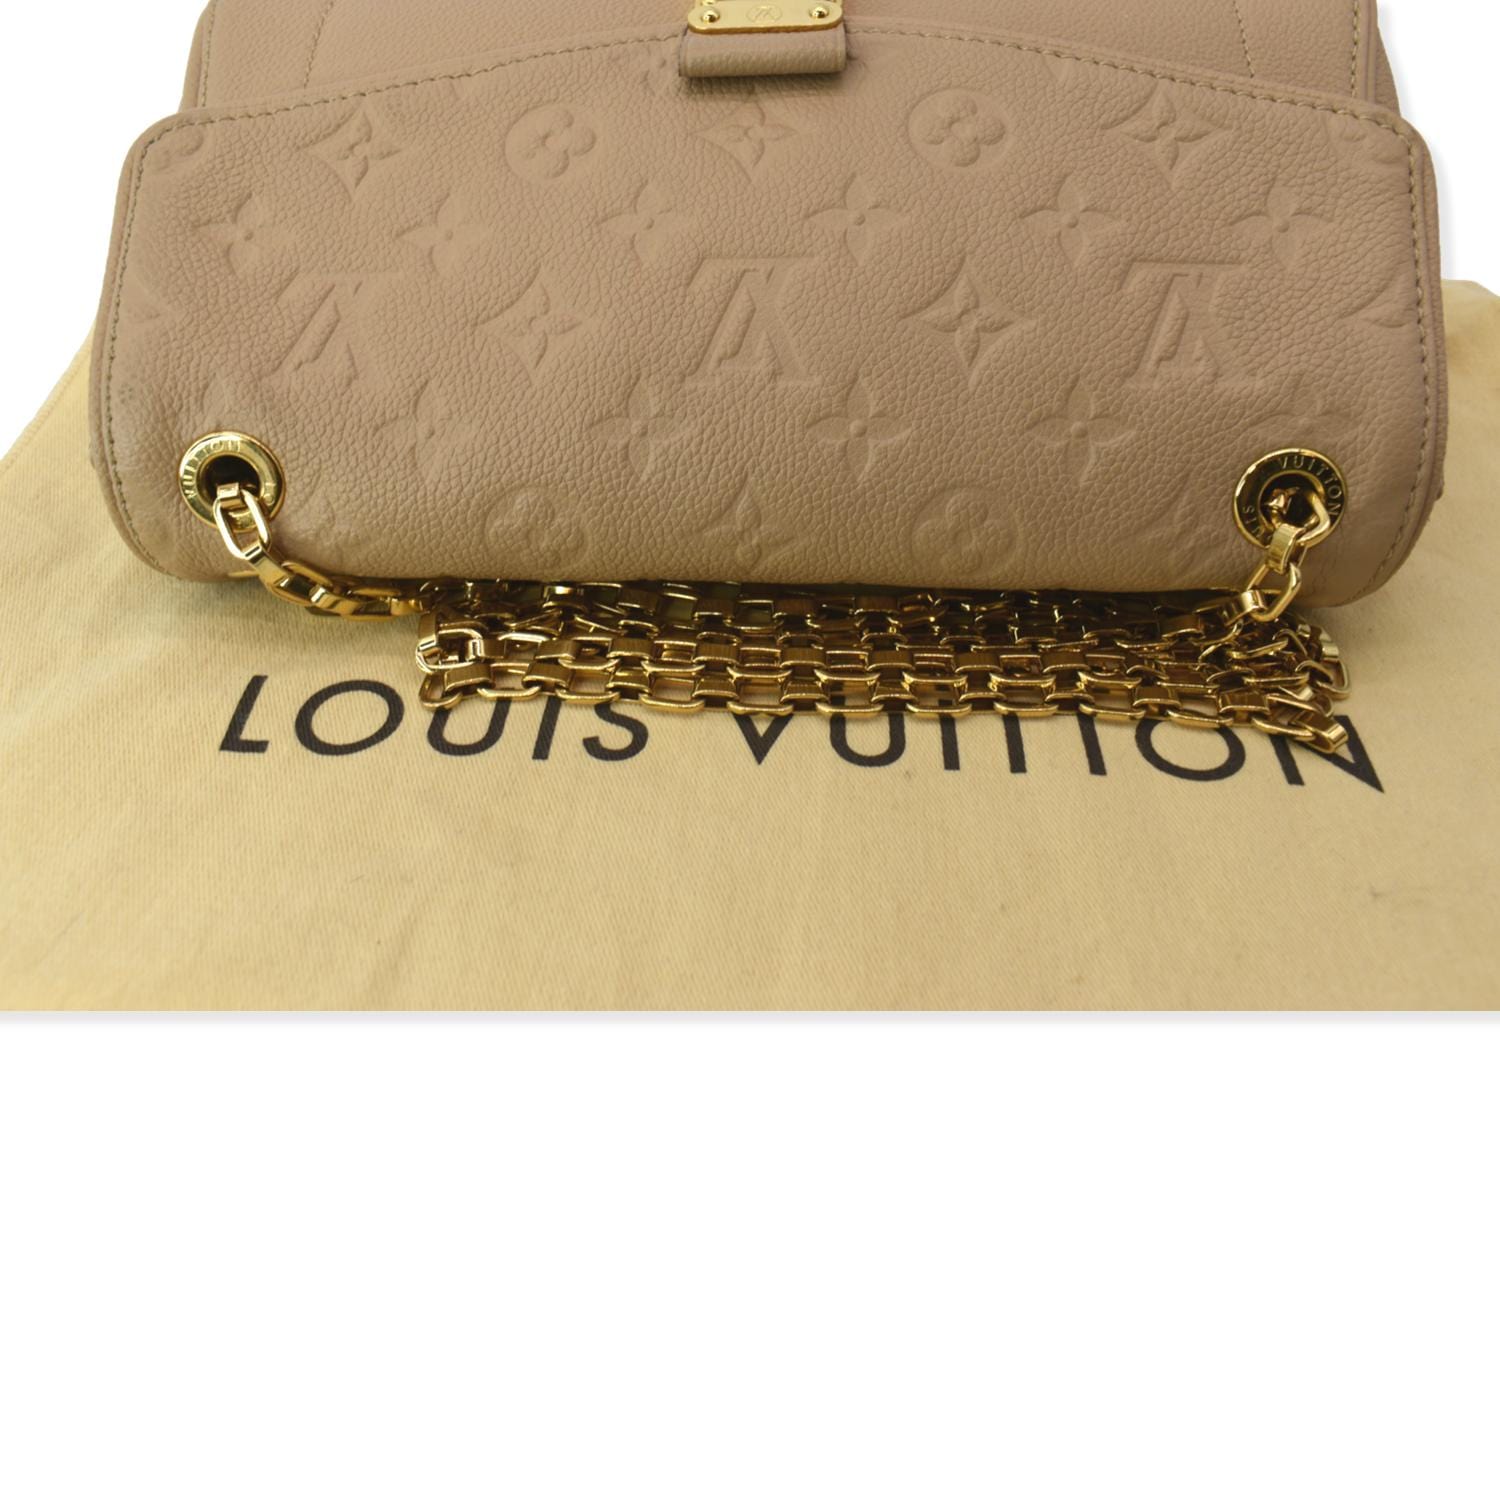 Louis Vuitton St. Germain bag dune leather, gray coat with mint scarf  outfit - Meagan's Moda